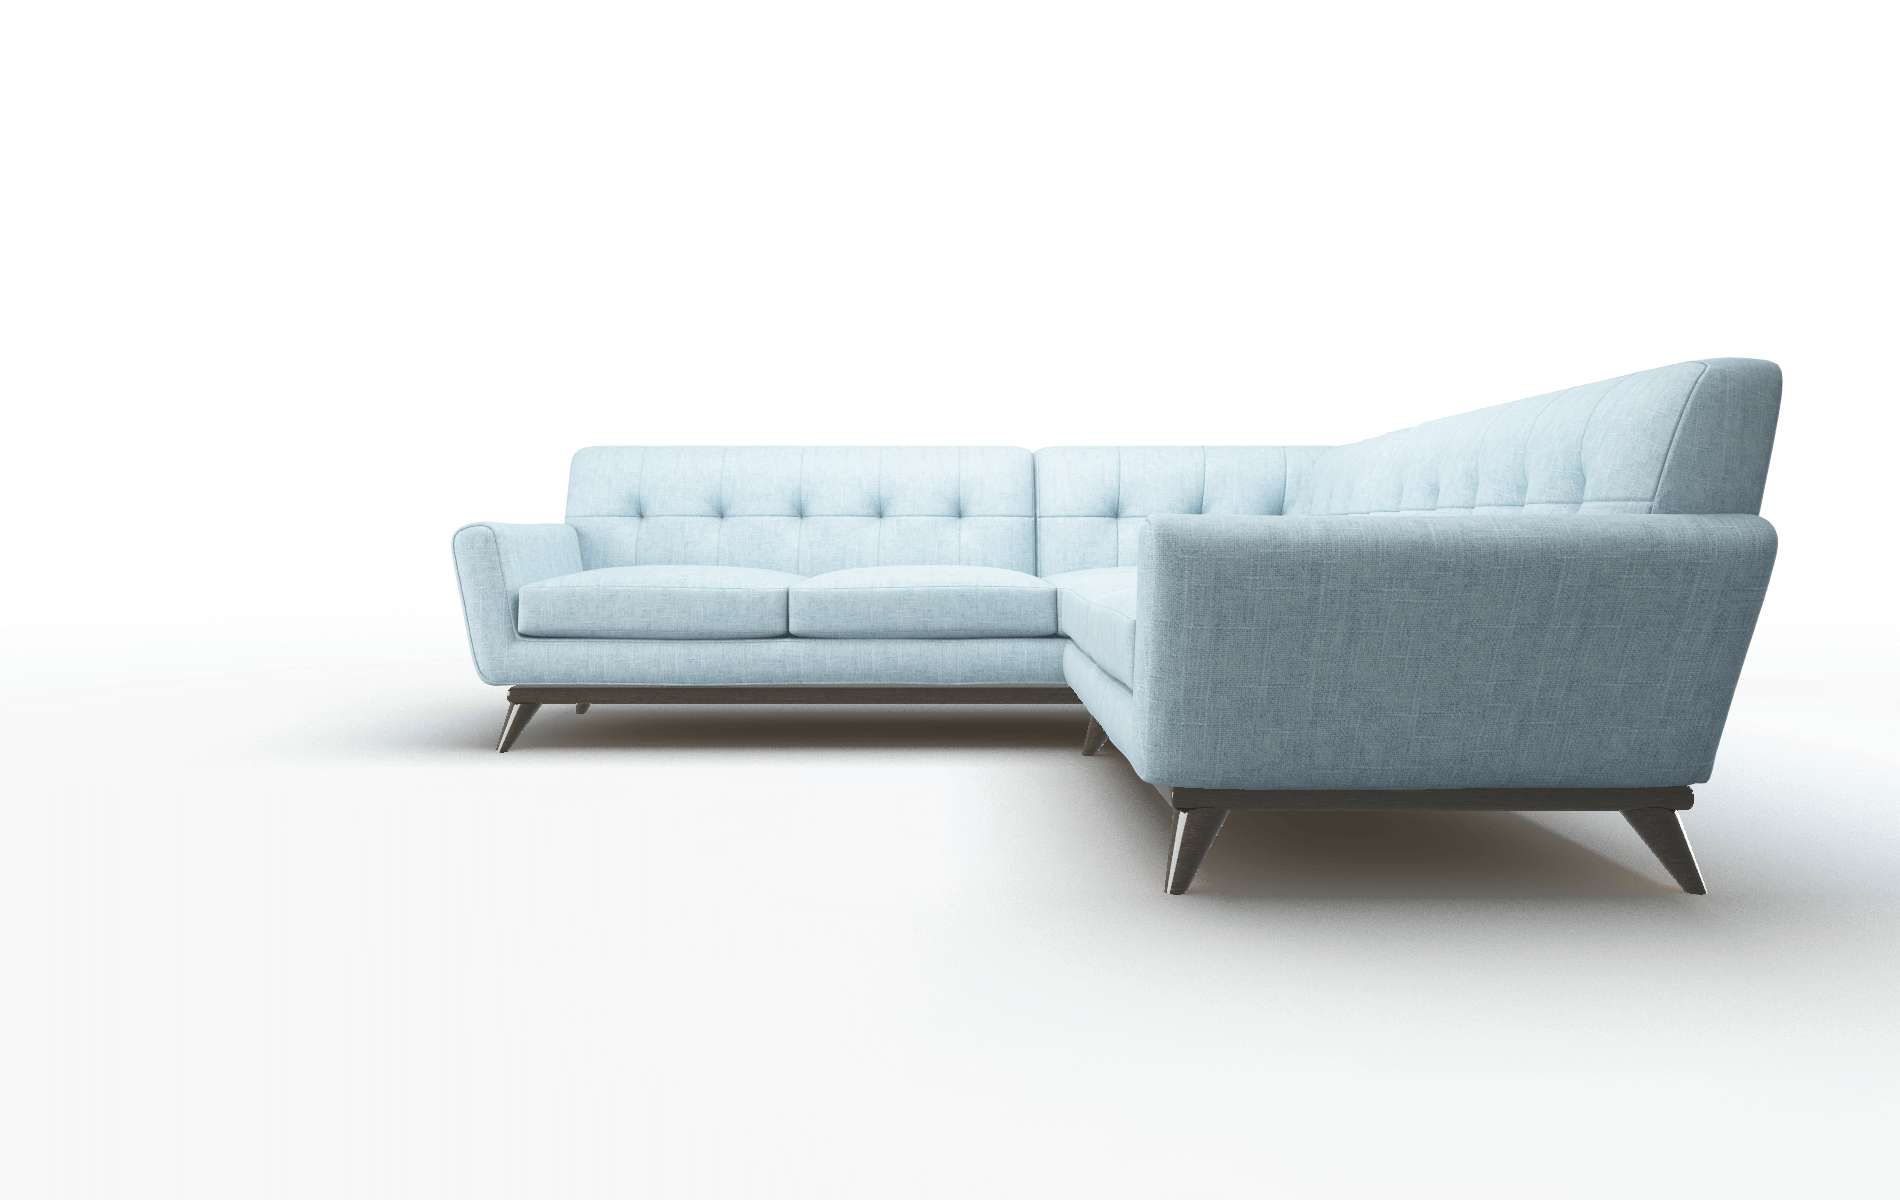 Brussels Atlas Turquoise Sectional espresso legs